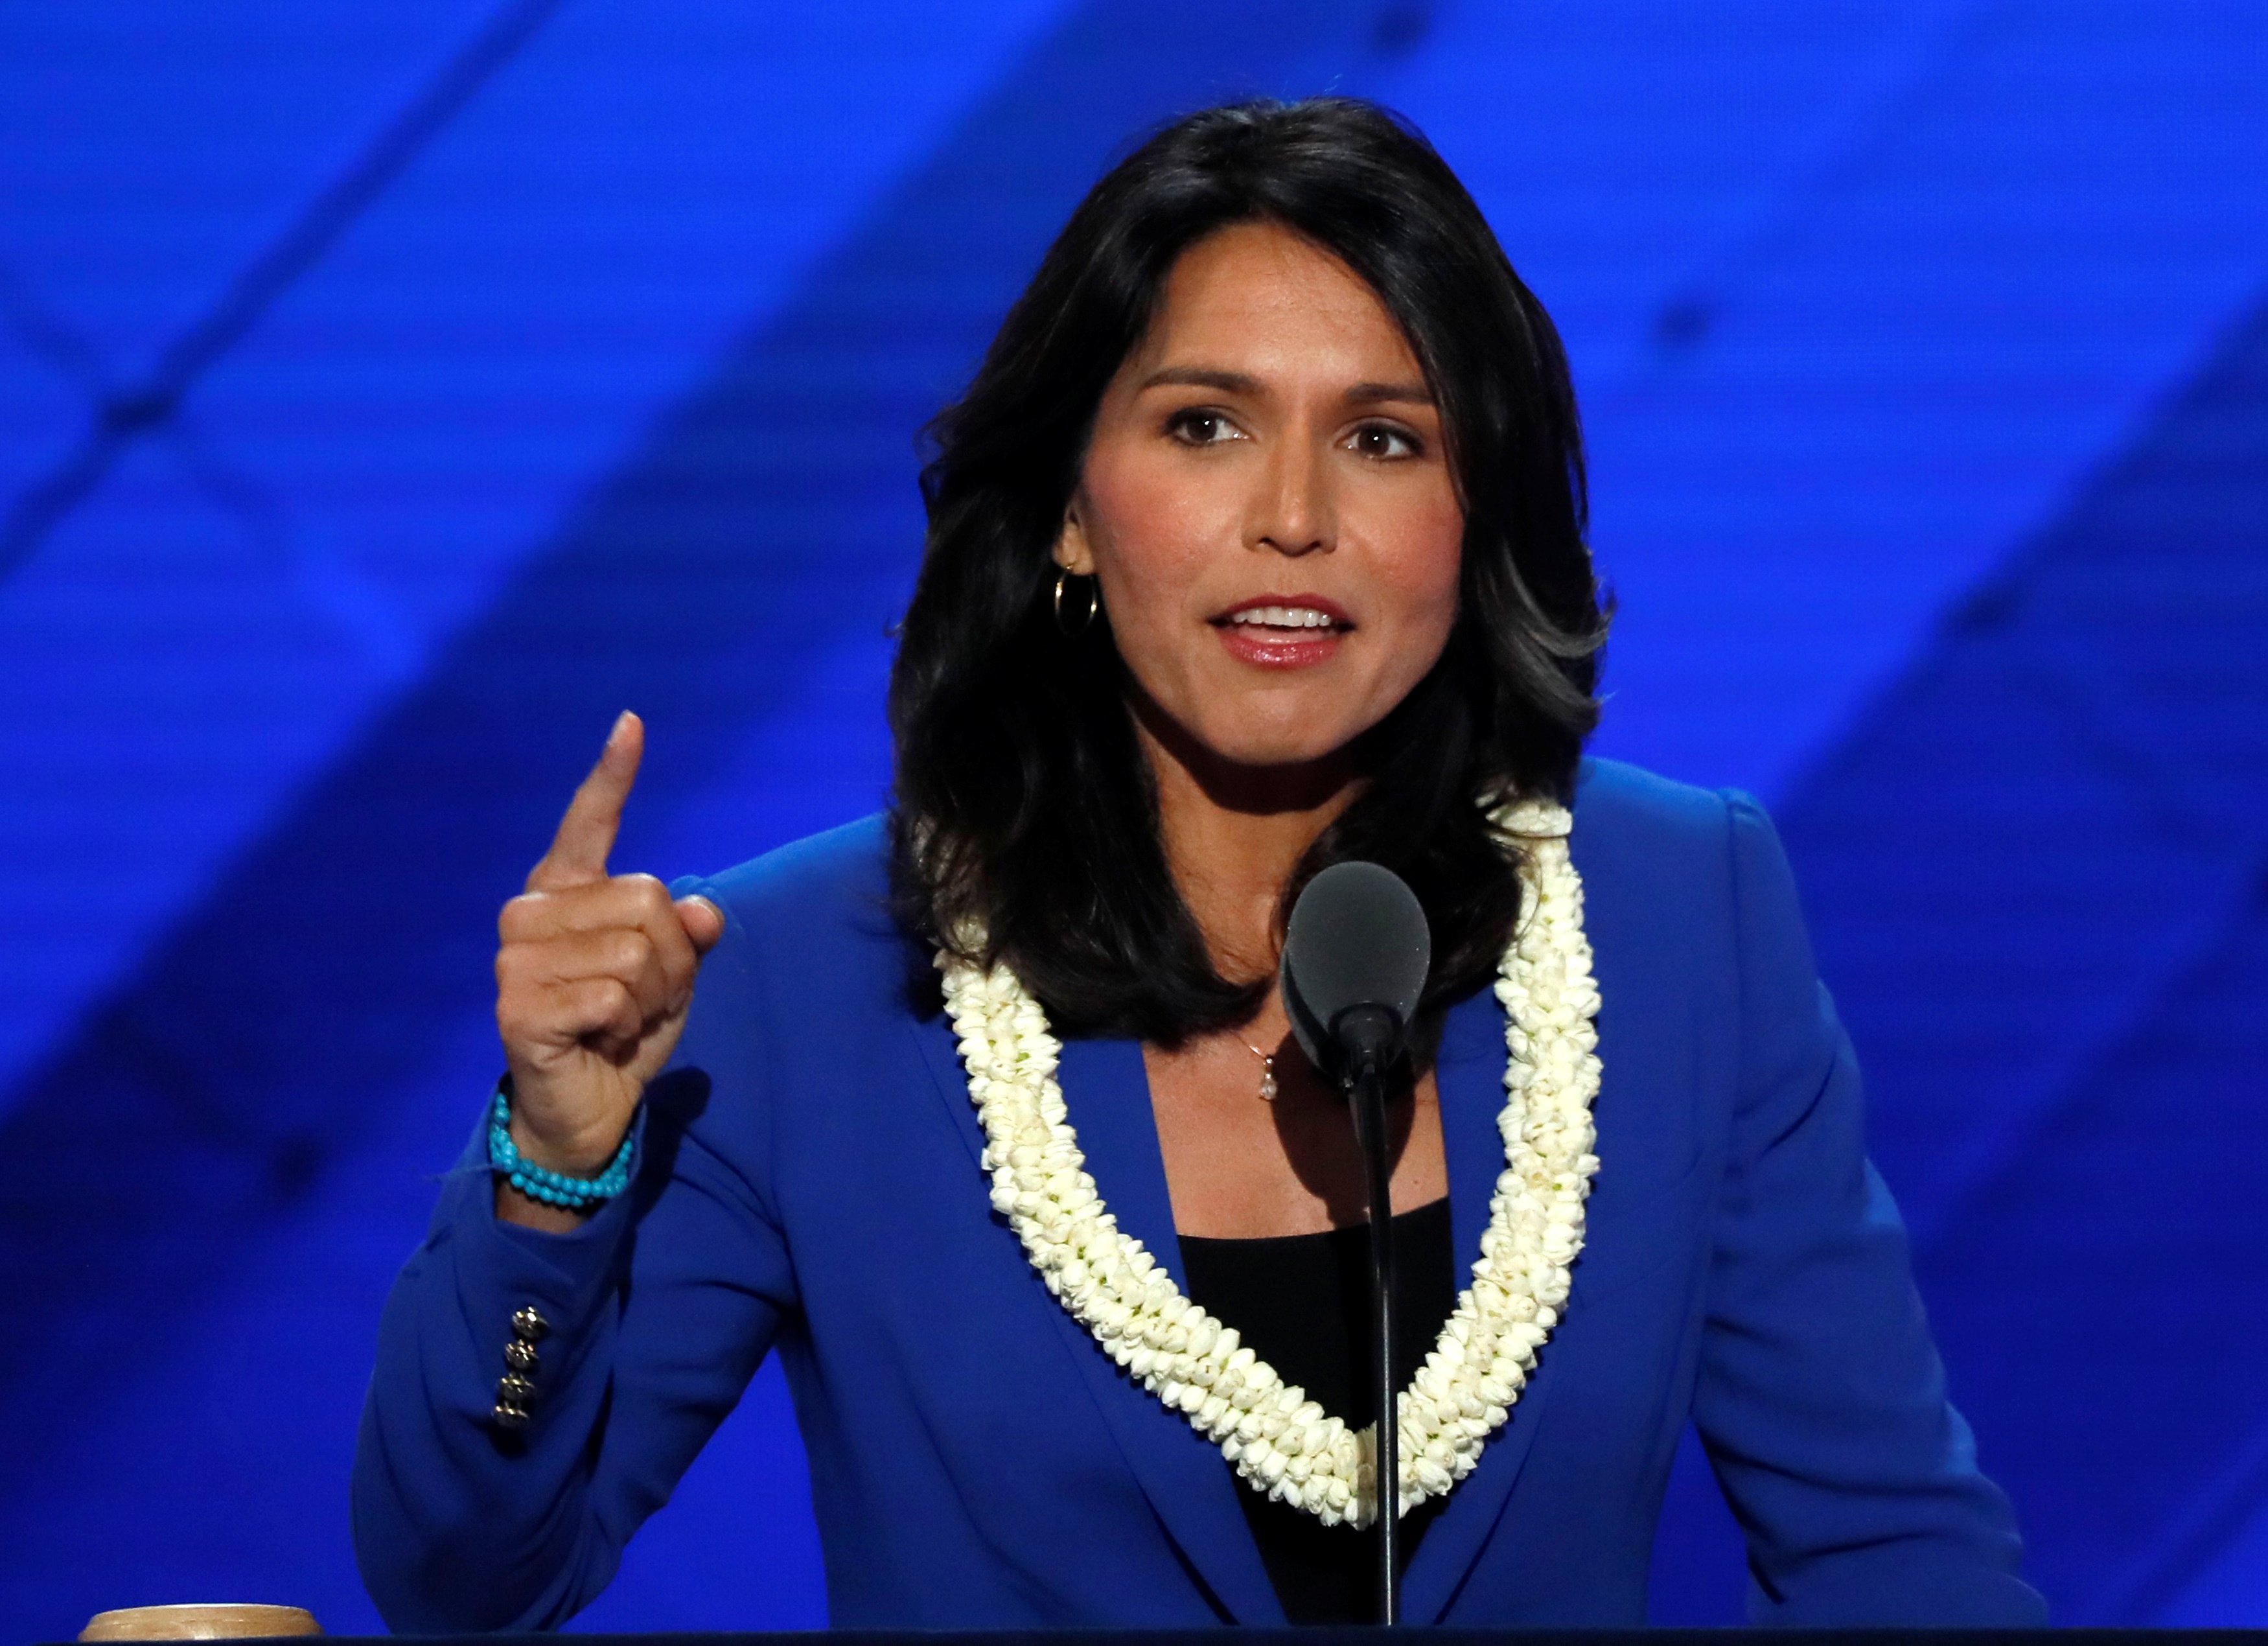 Are the Democrats Ready for Tulsi Gabbard? The National Interest